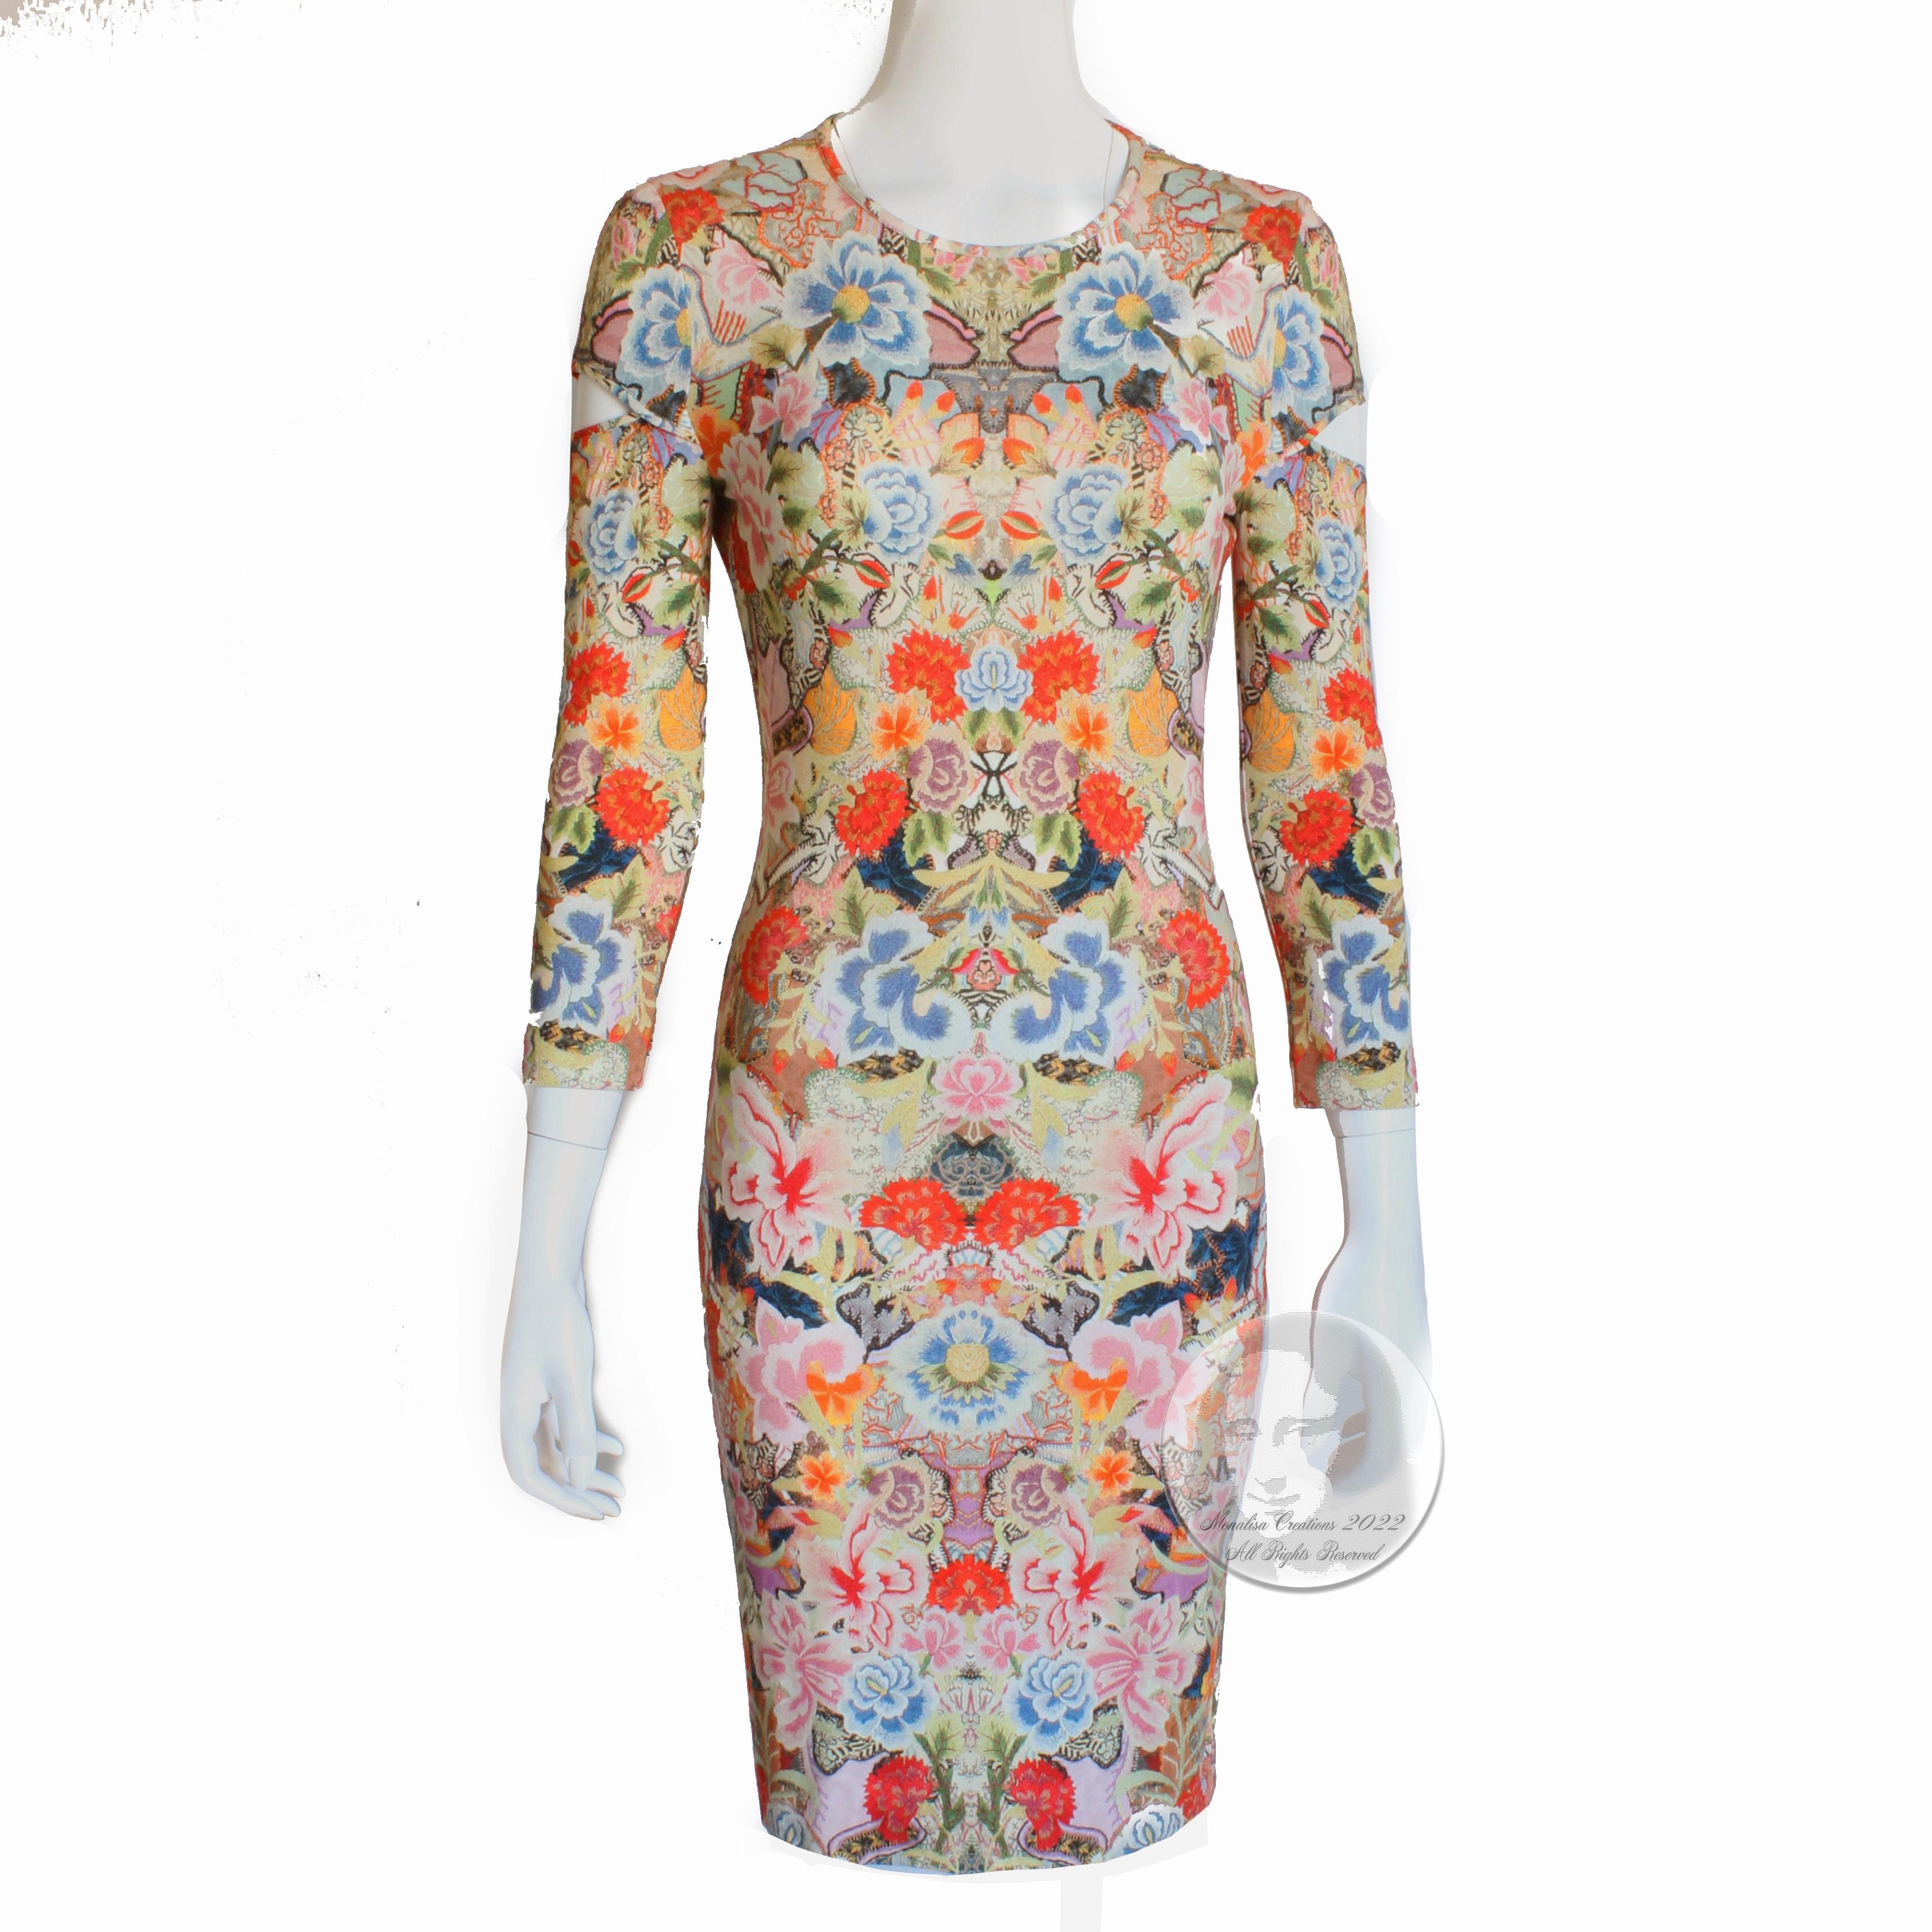 Authentic, preowned Alexander McQueen slash sleeve cutout dress with abstract kaleidoscope floral print from the 2014 collection. Made from a rayon/elastane blend fabric, this dress fits like a glove and is designed to show off your curves! 

With